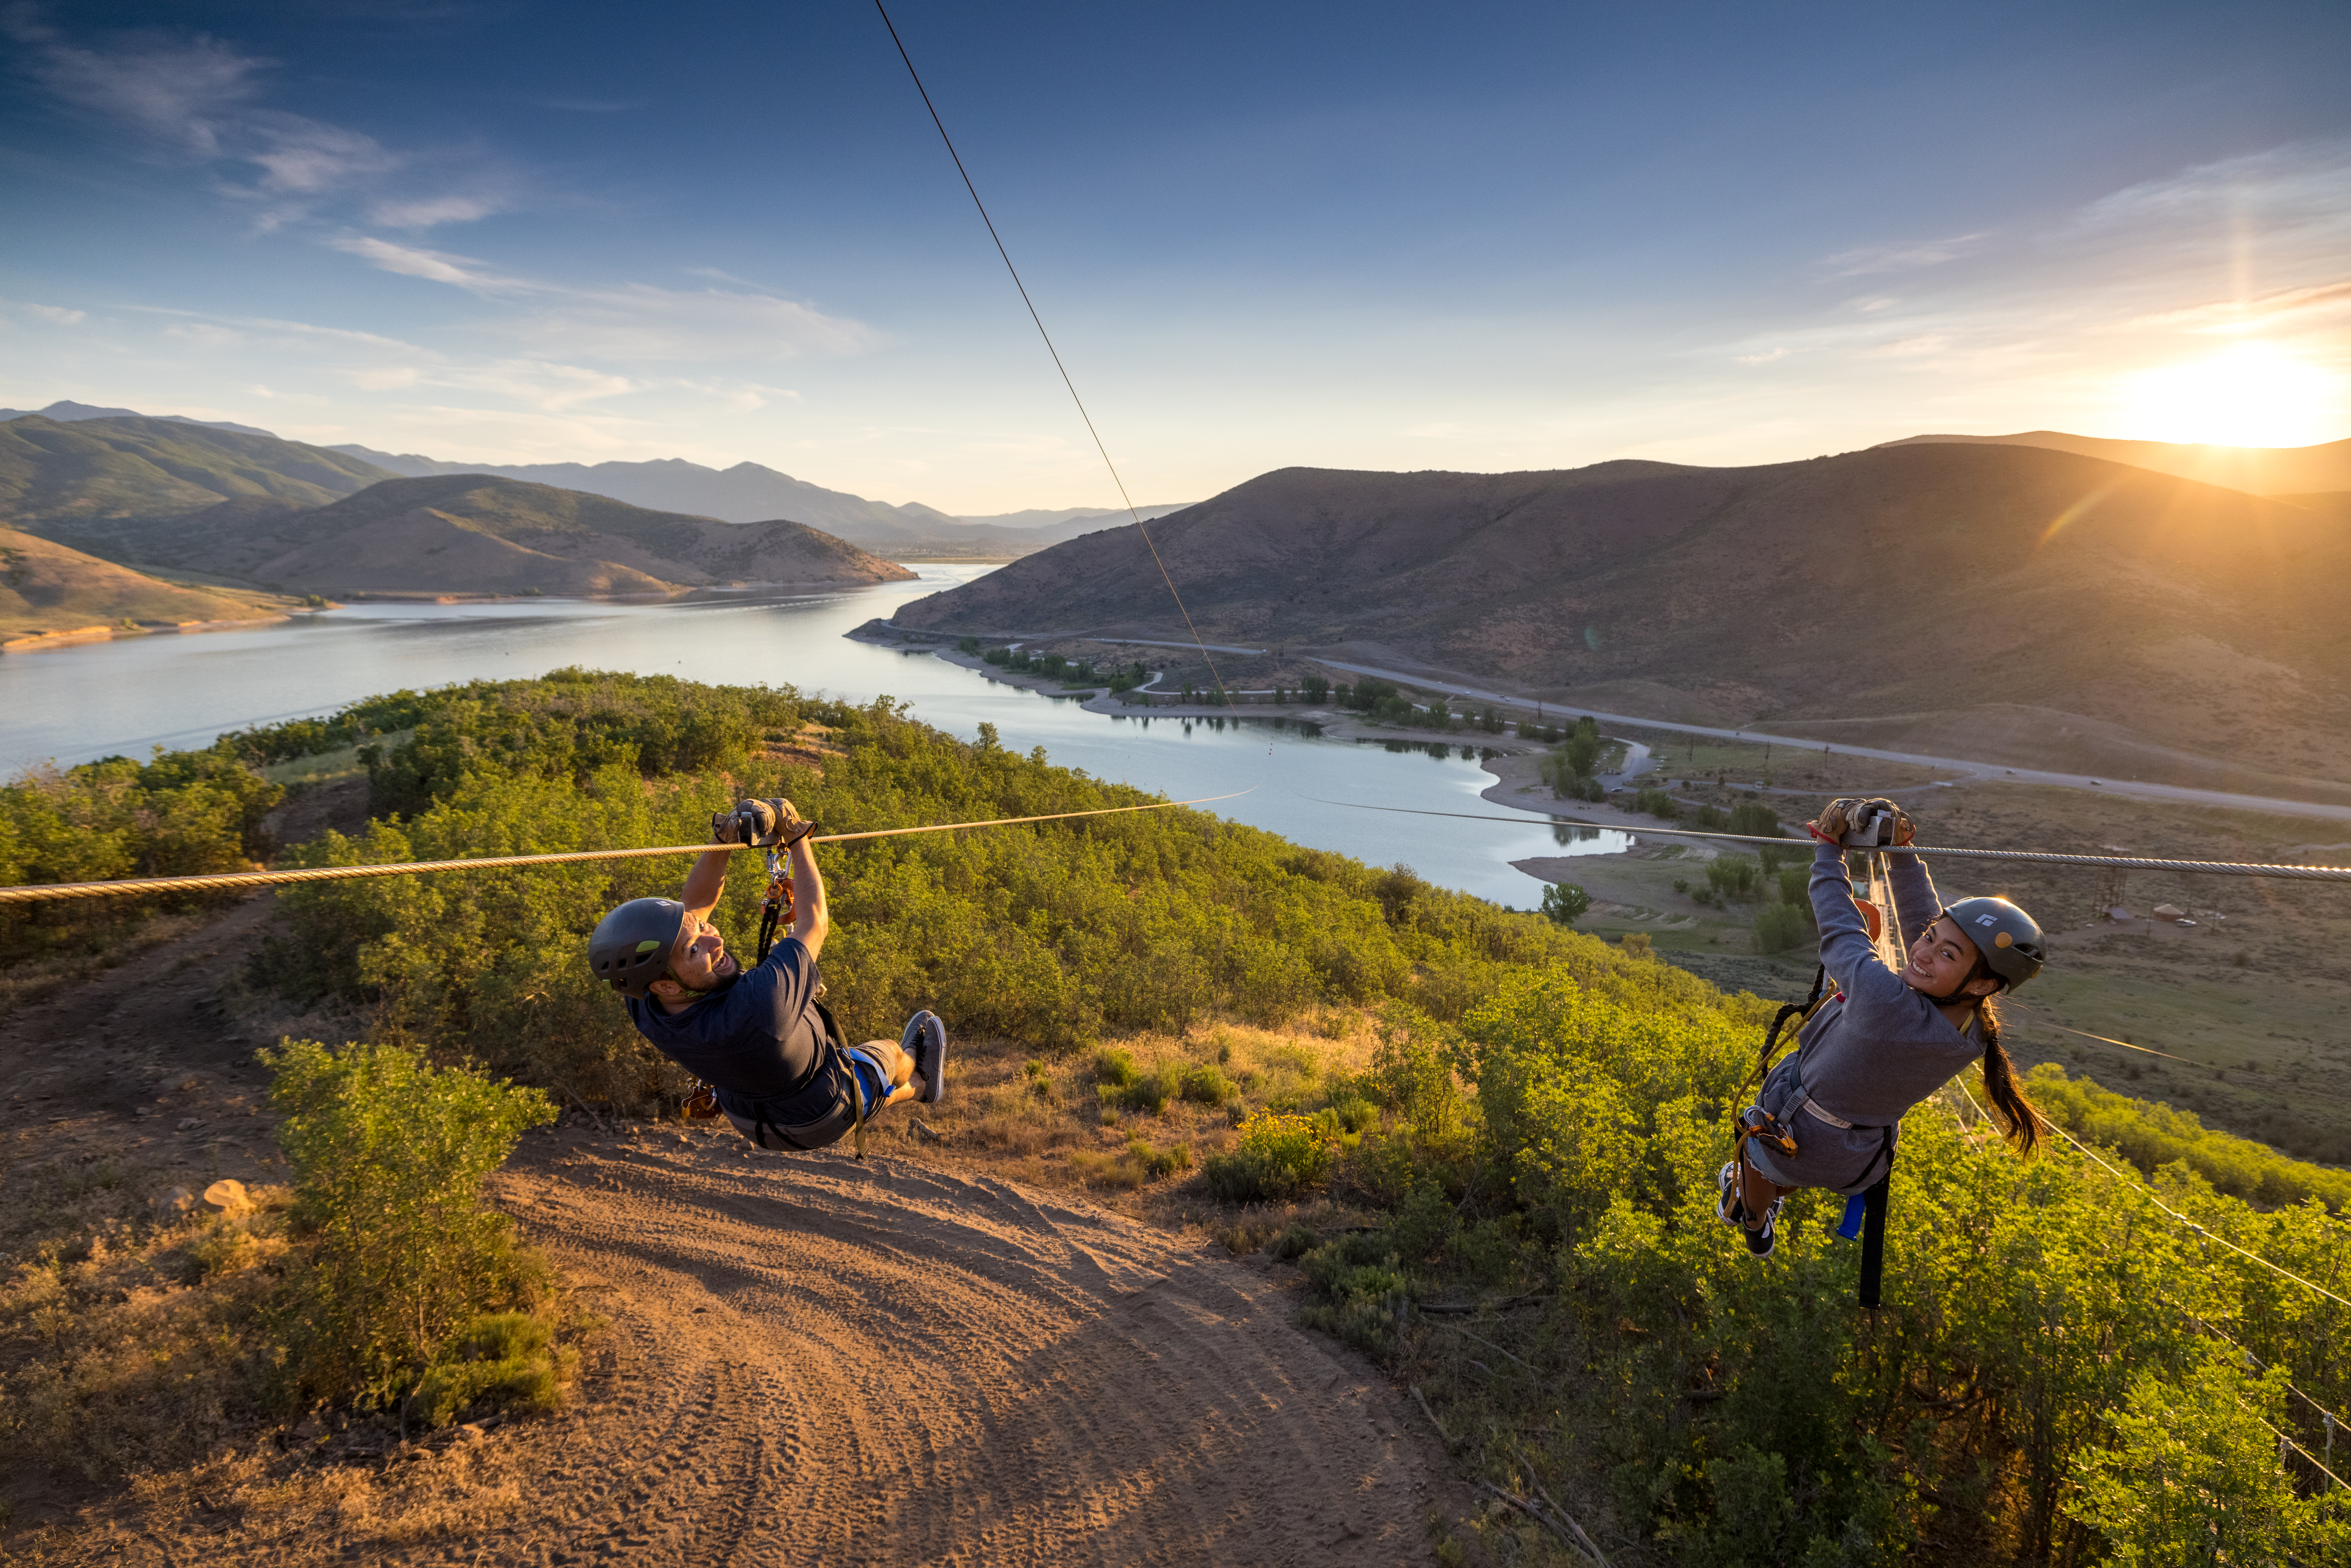 Go on a zipline adventure at these 22 courses from around the world